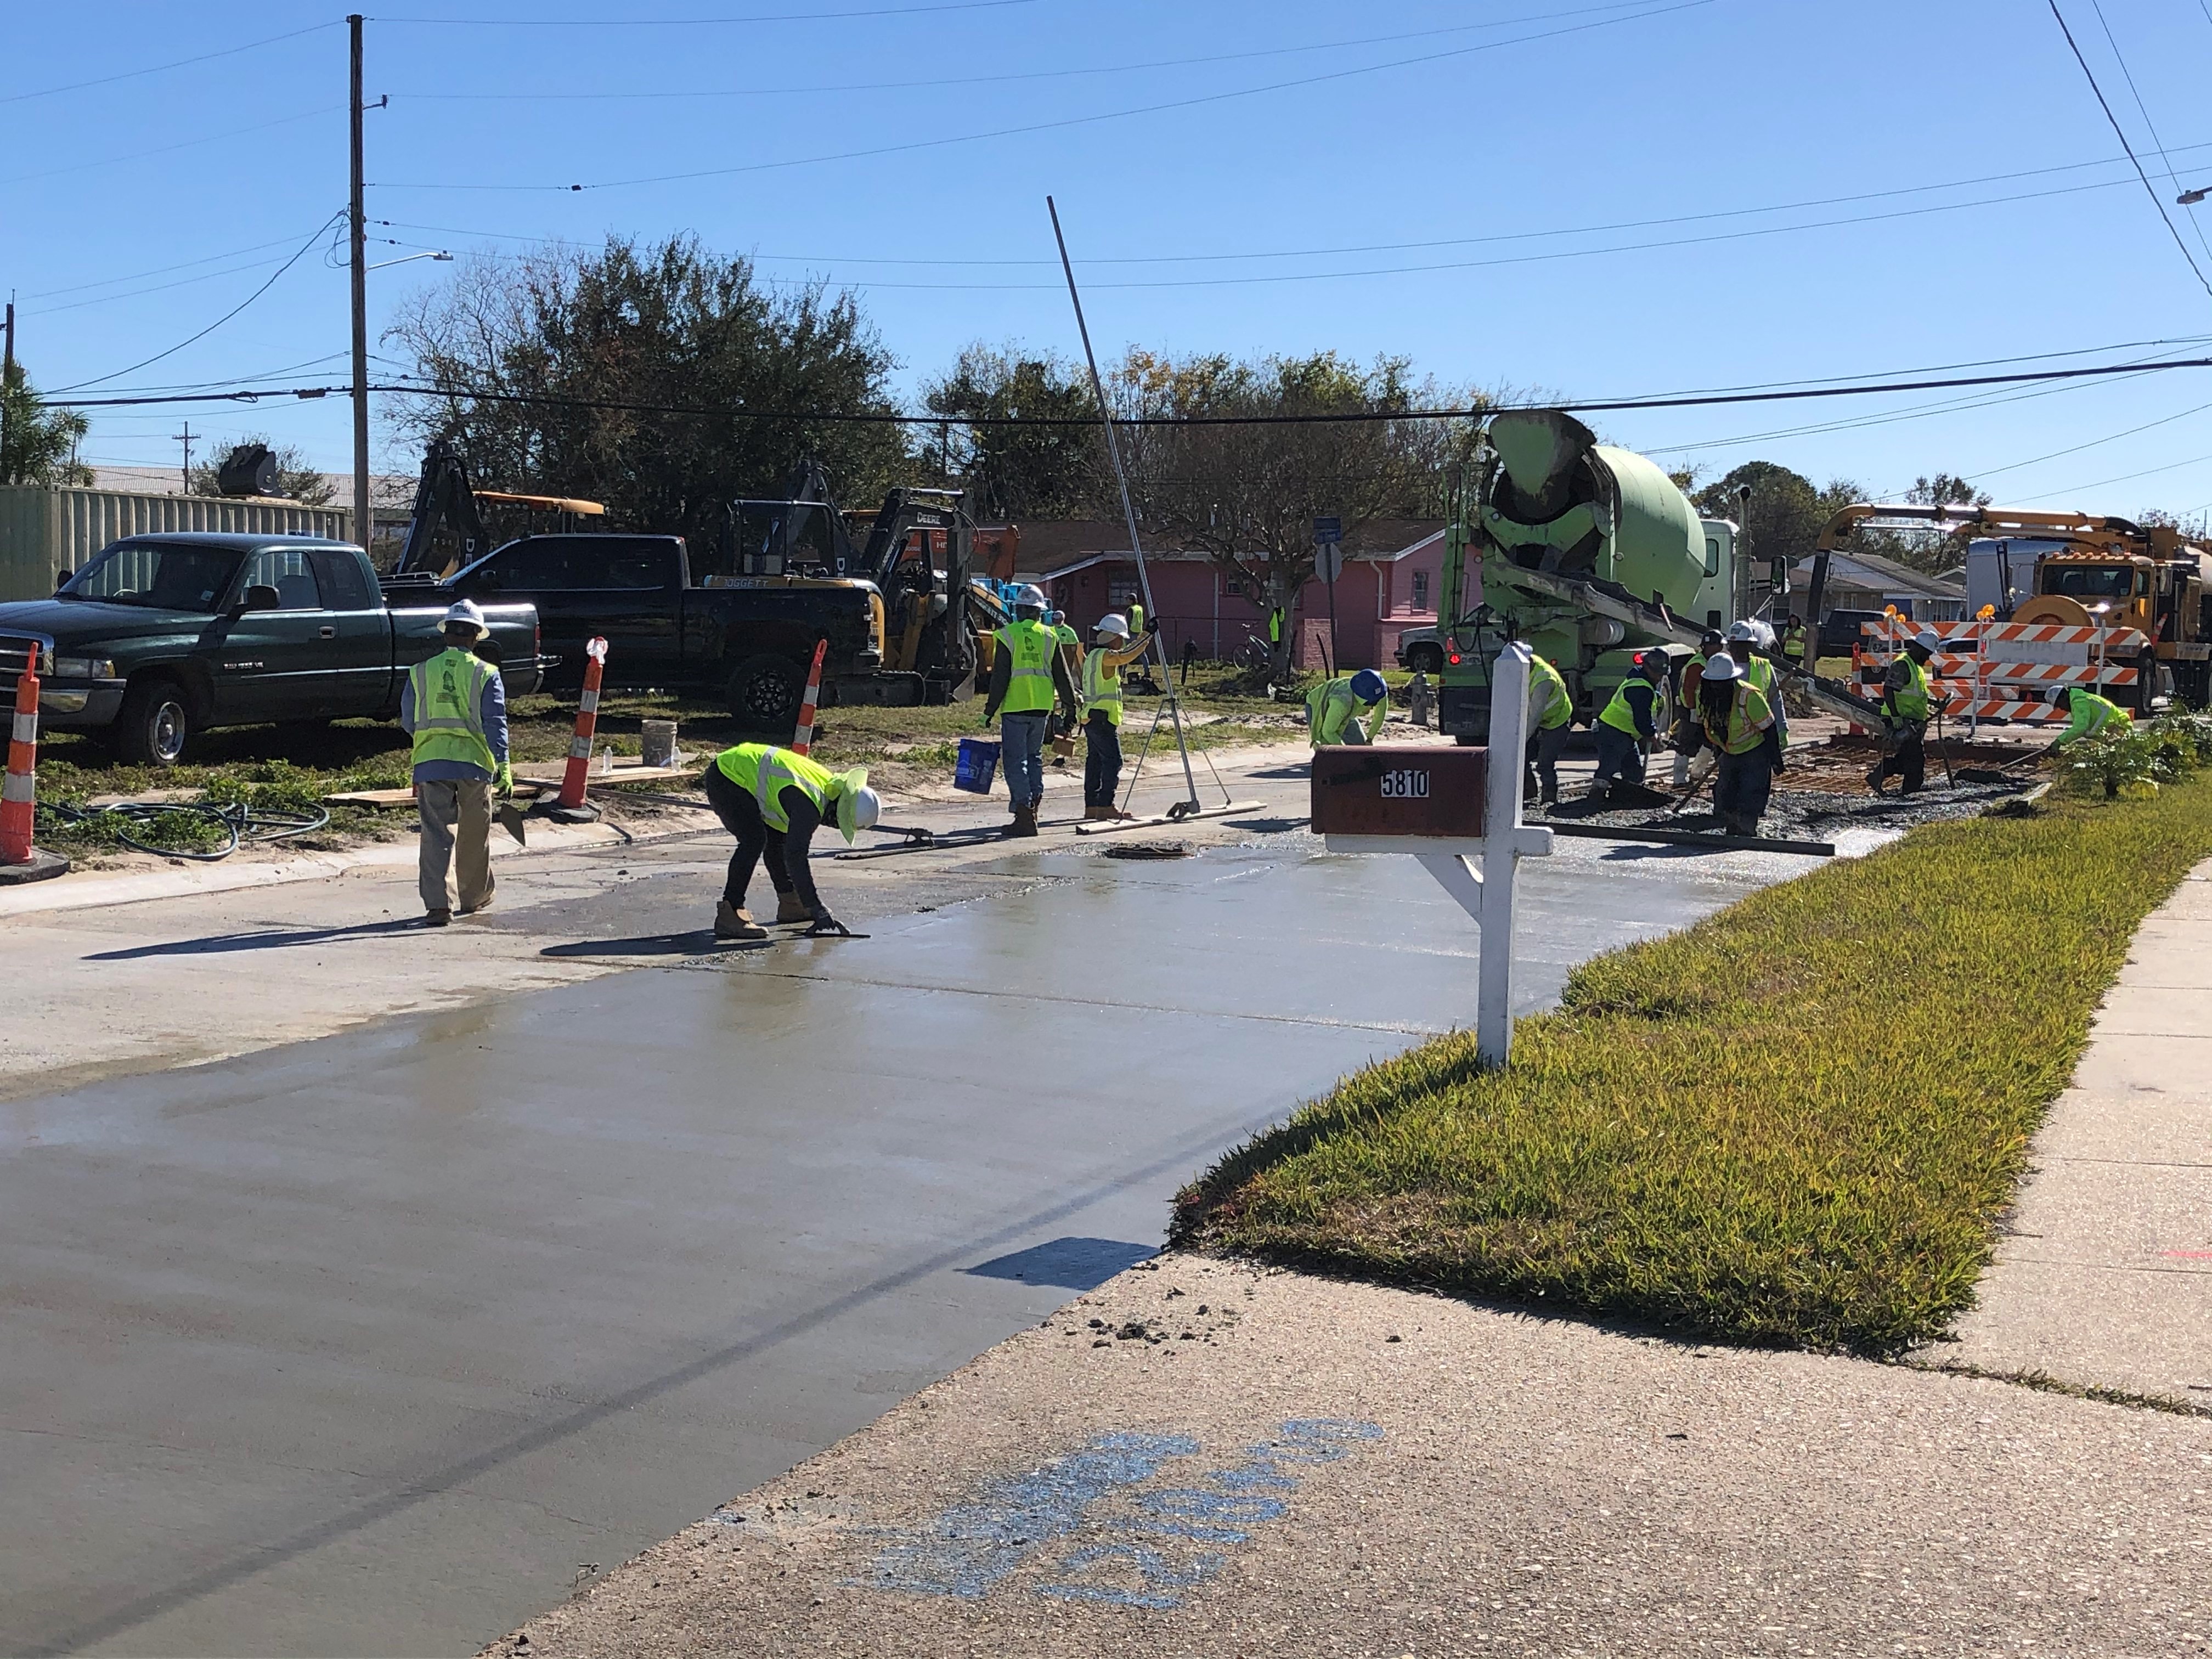 PONTCHARTRAIN PARK GROUP A CONTINUES NEW ROADWAY CONSTRUCTION IN THE HISTORIC PONTCHARTRAIN PARK NEIGHBORHOOD